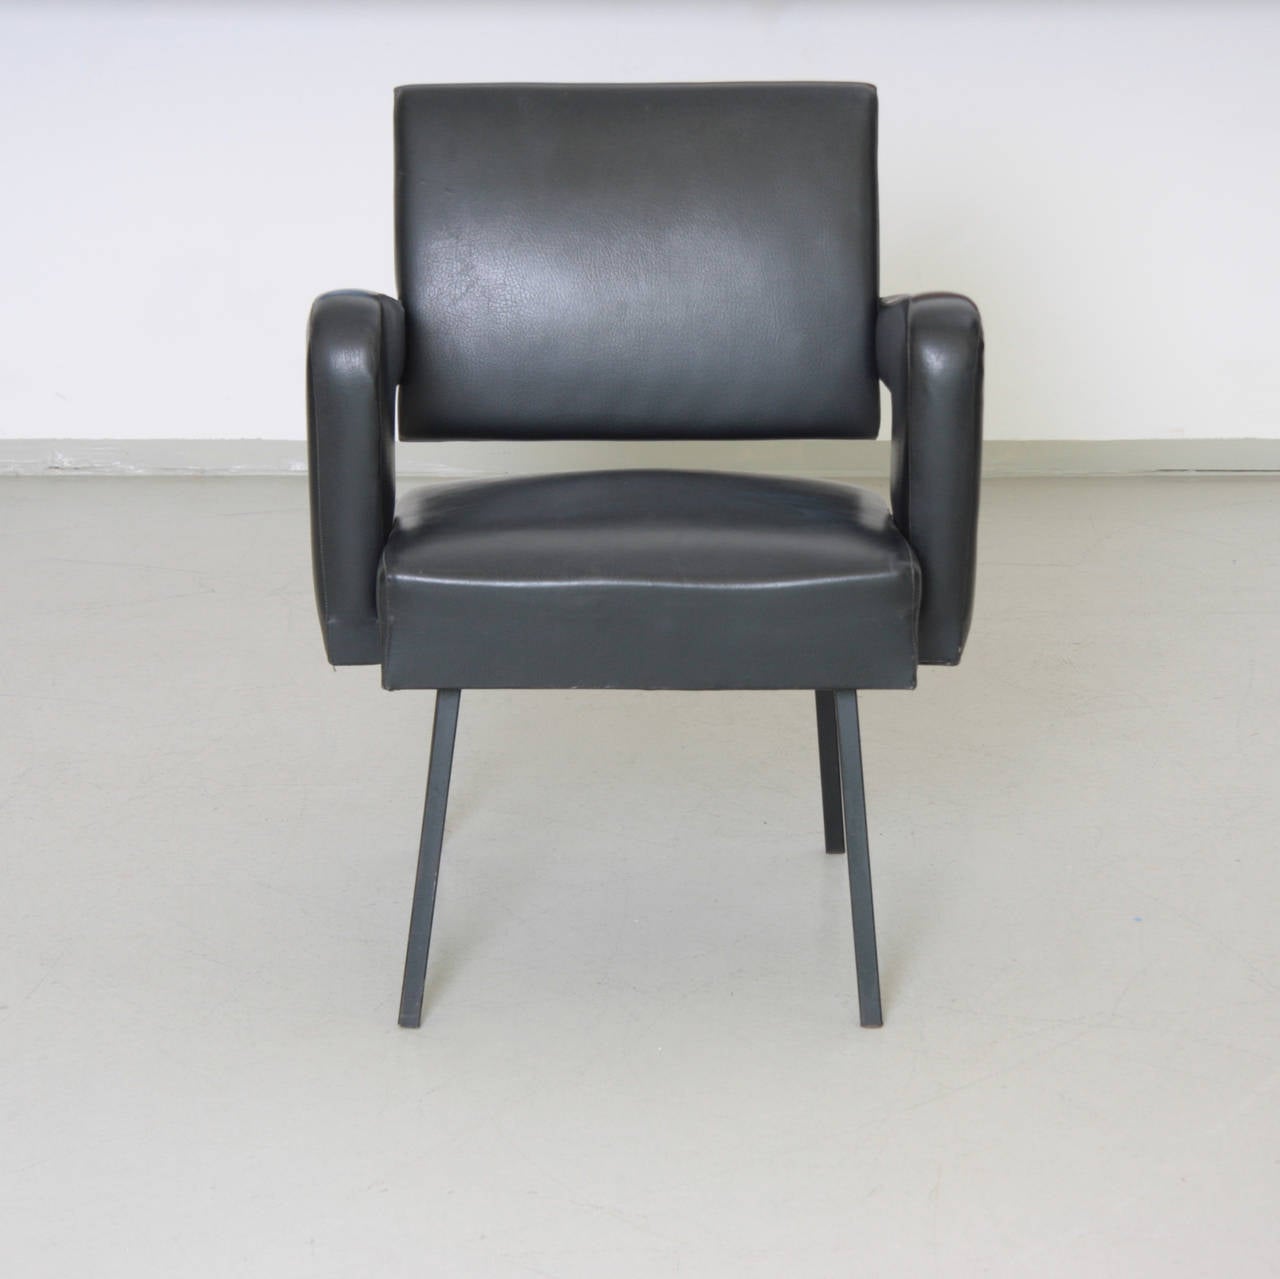 This chair was produced 1958 for the CEA (Comissariat l`Energie Atomique) by Jacques Adnet. That chair was located at the DAM (Direction des' Applications Militaires) in the Paris region. See label!

The chair is published in the Jacques Adnet